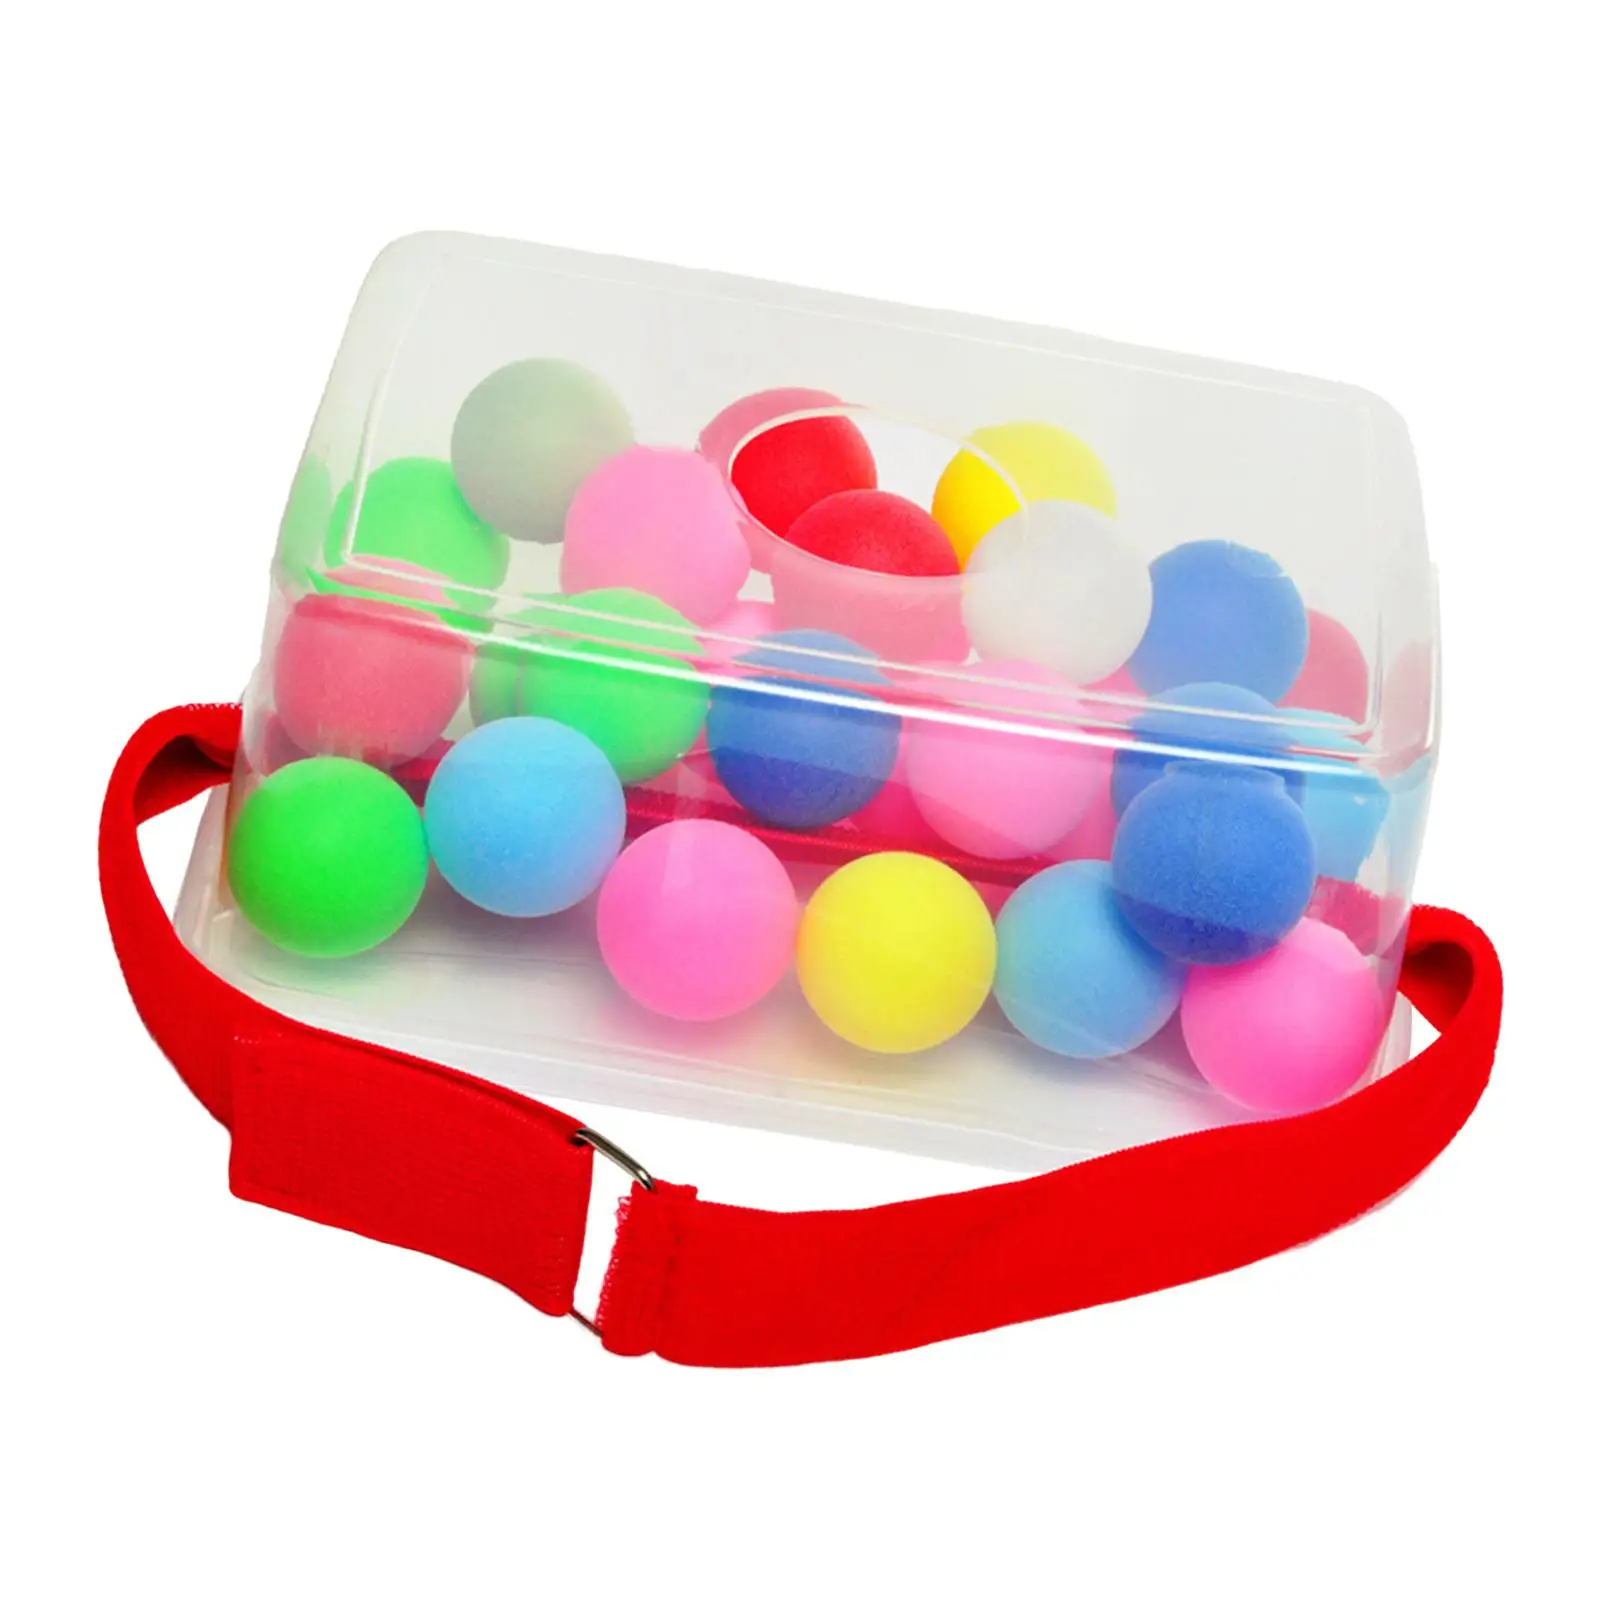 Fun Shaking Swing Balls Game set Swing Balls Game Birthday Gifts with 30 Ball for Party Game Outdoors Kids Boys and Girls Adults